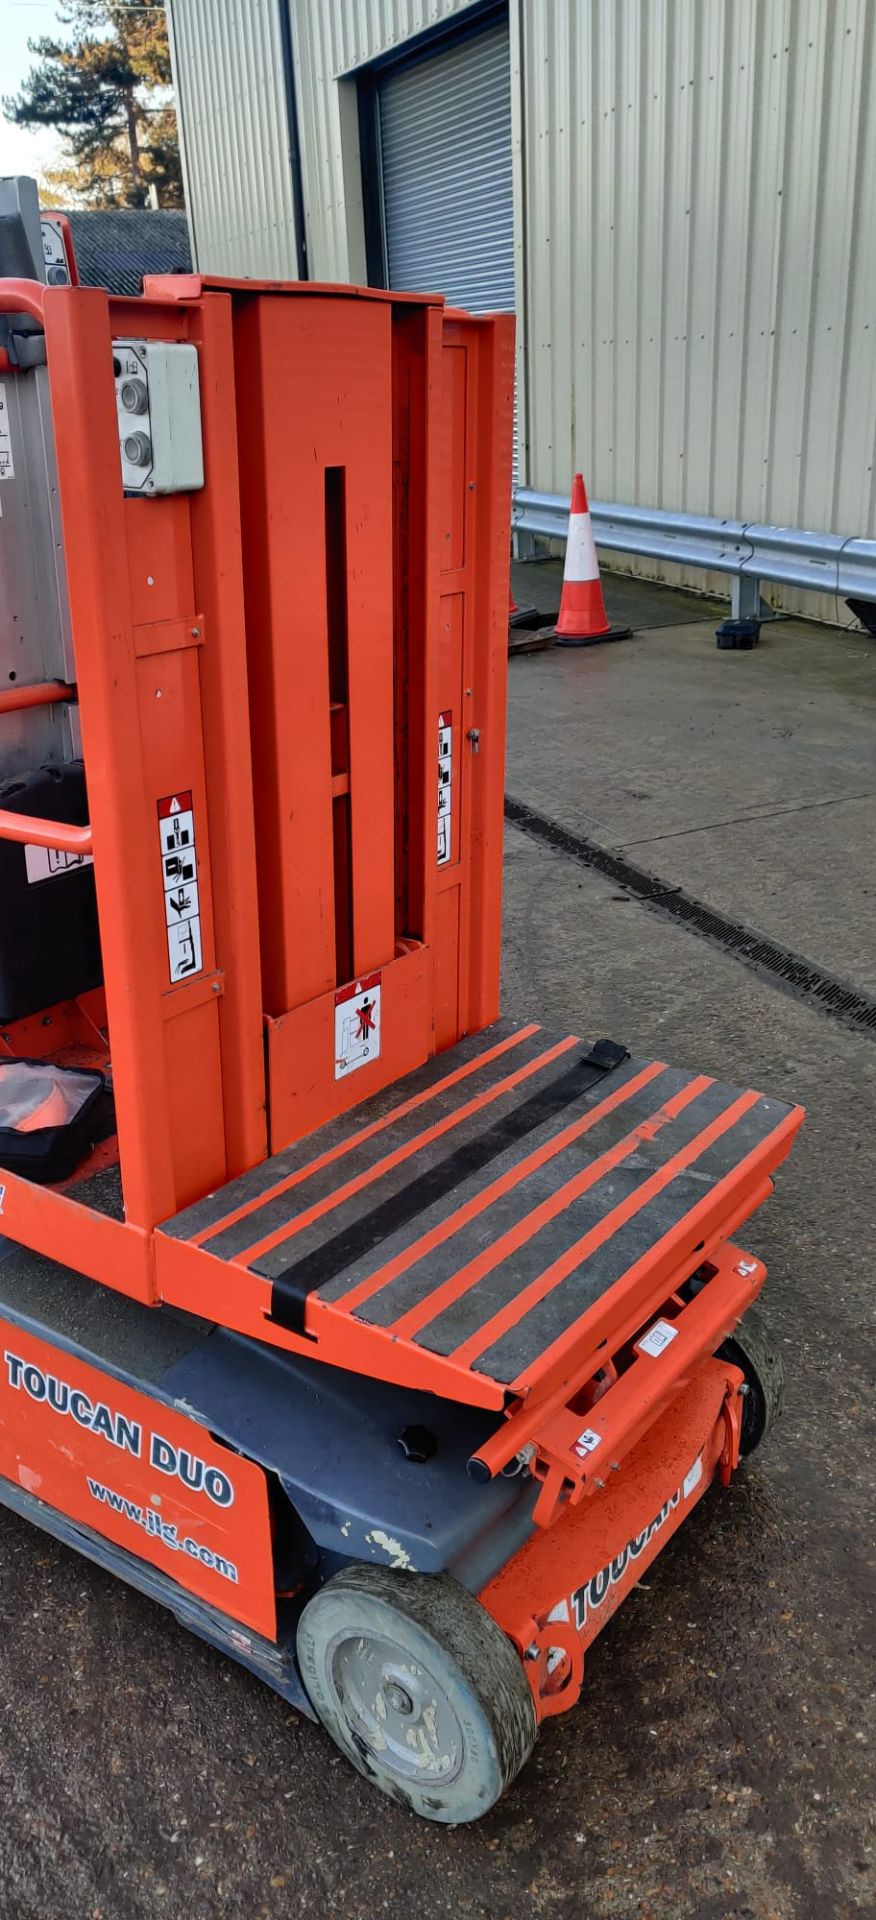 2016 JLG TOUCAN DUO STOCK PICKER, SERVICED EVERY YEAR, CURRENT LOLER VALID TILL 04/22 *PLUS VAT* - Image 3 of 11